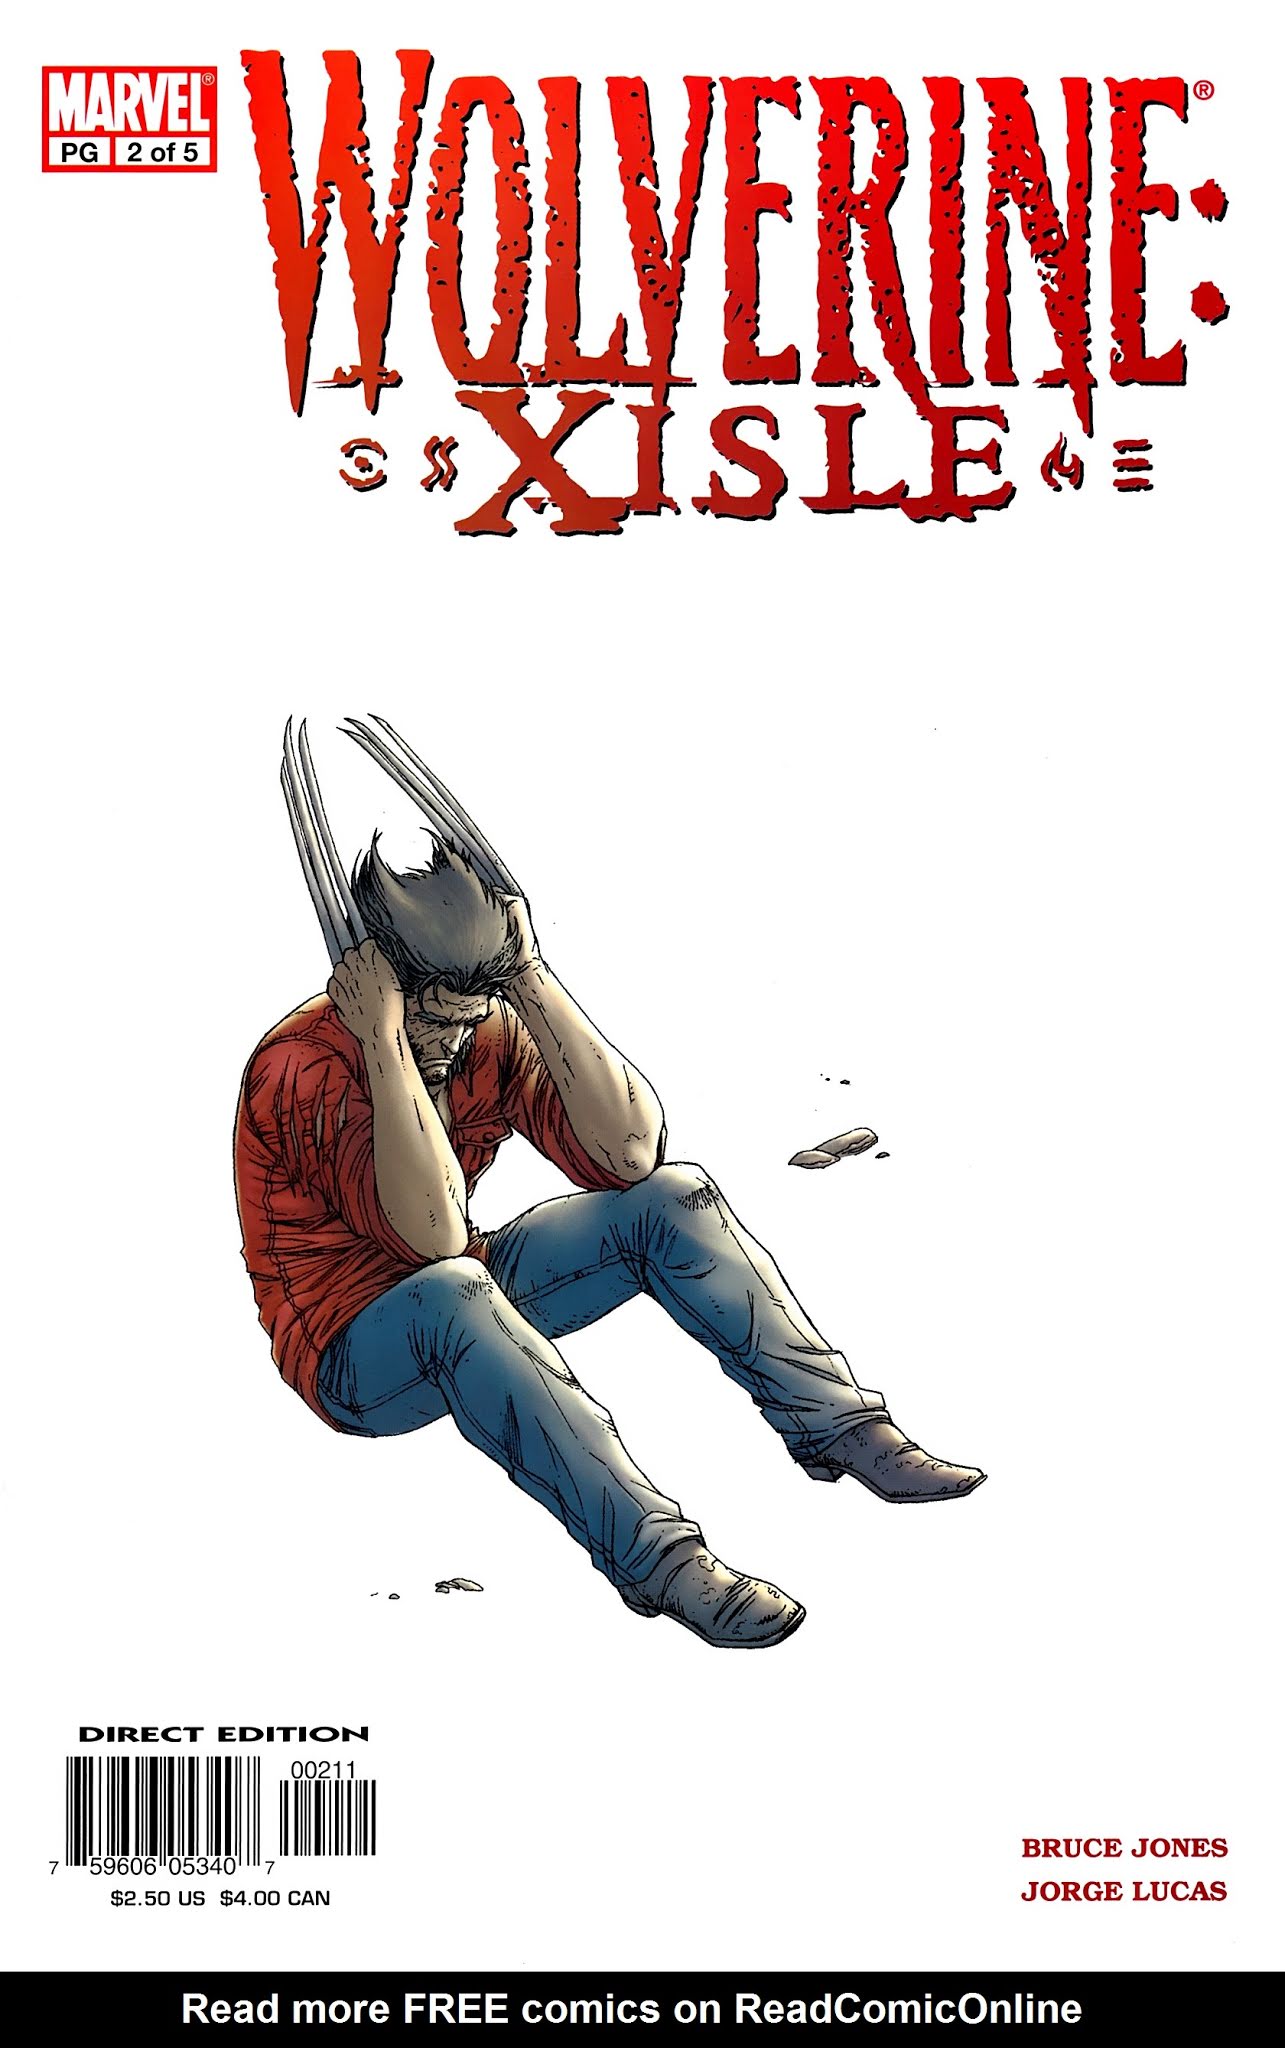 Read online Wolverine: Xisle comic -  Issue #2 - 1